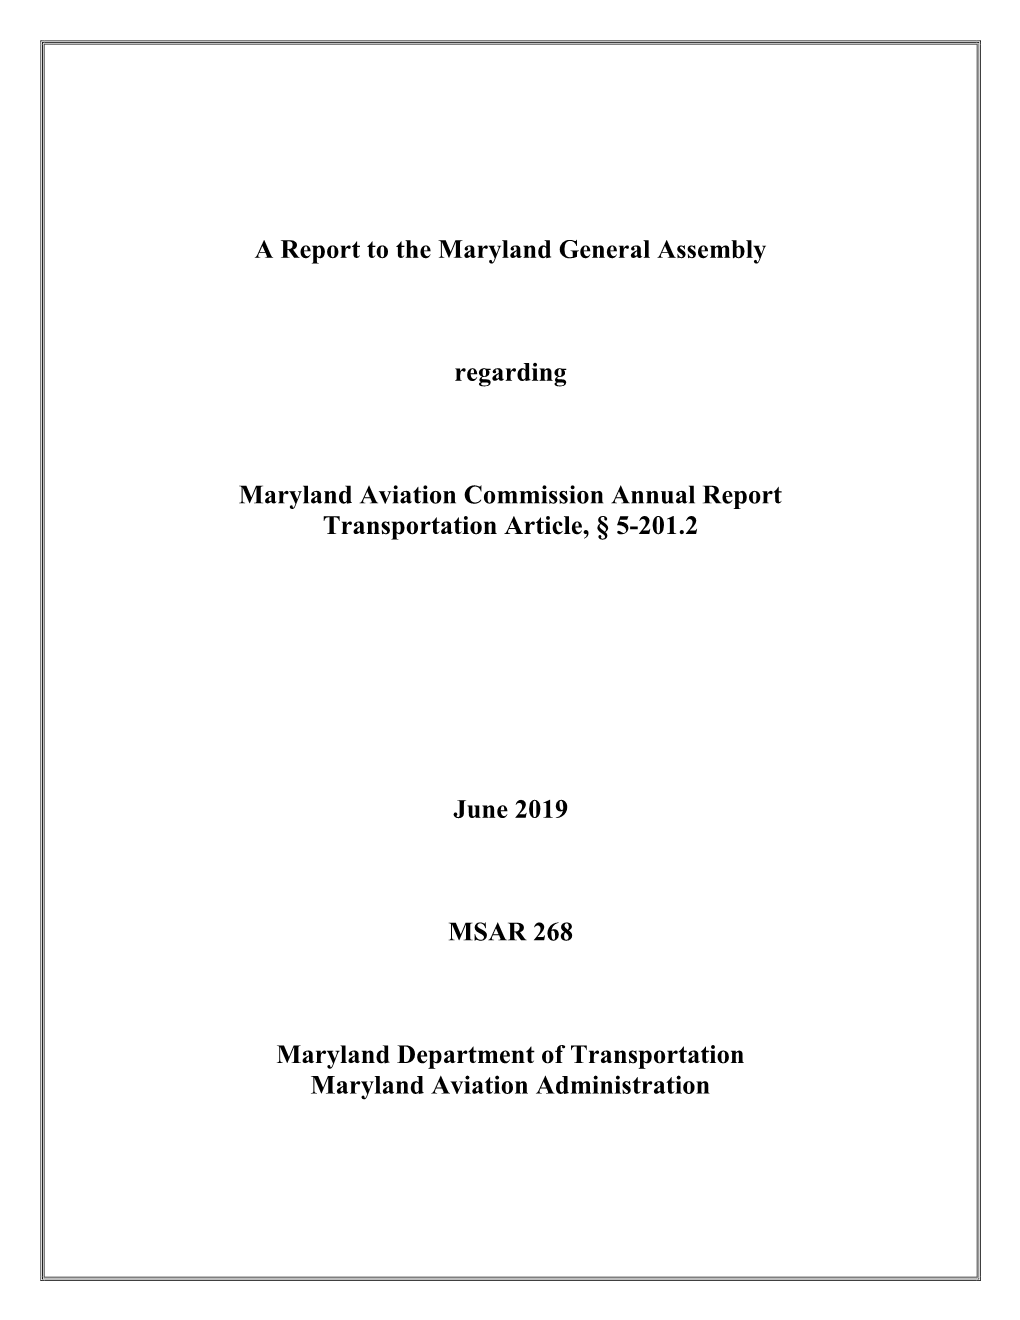 Report to Maryland General Assembly 2019